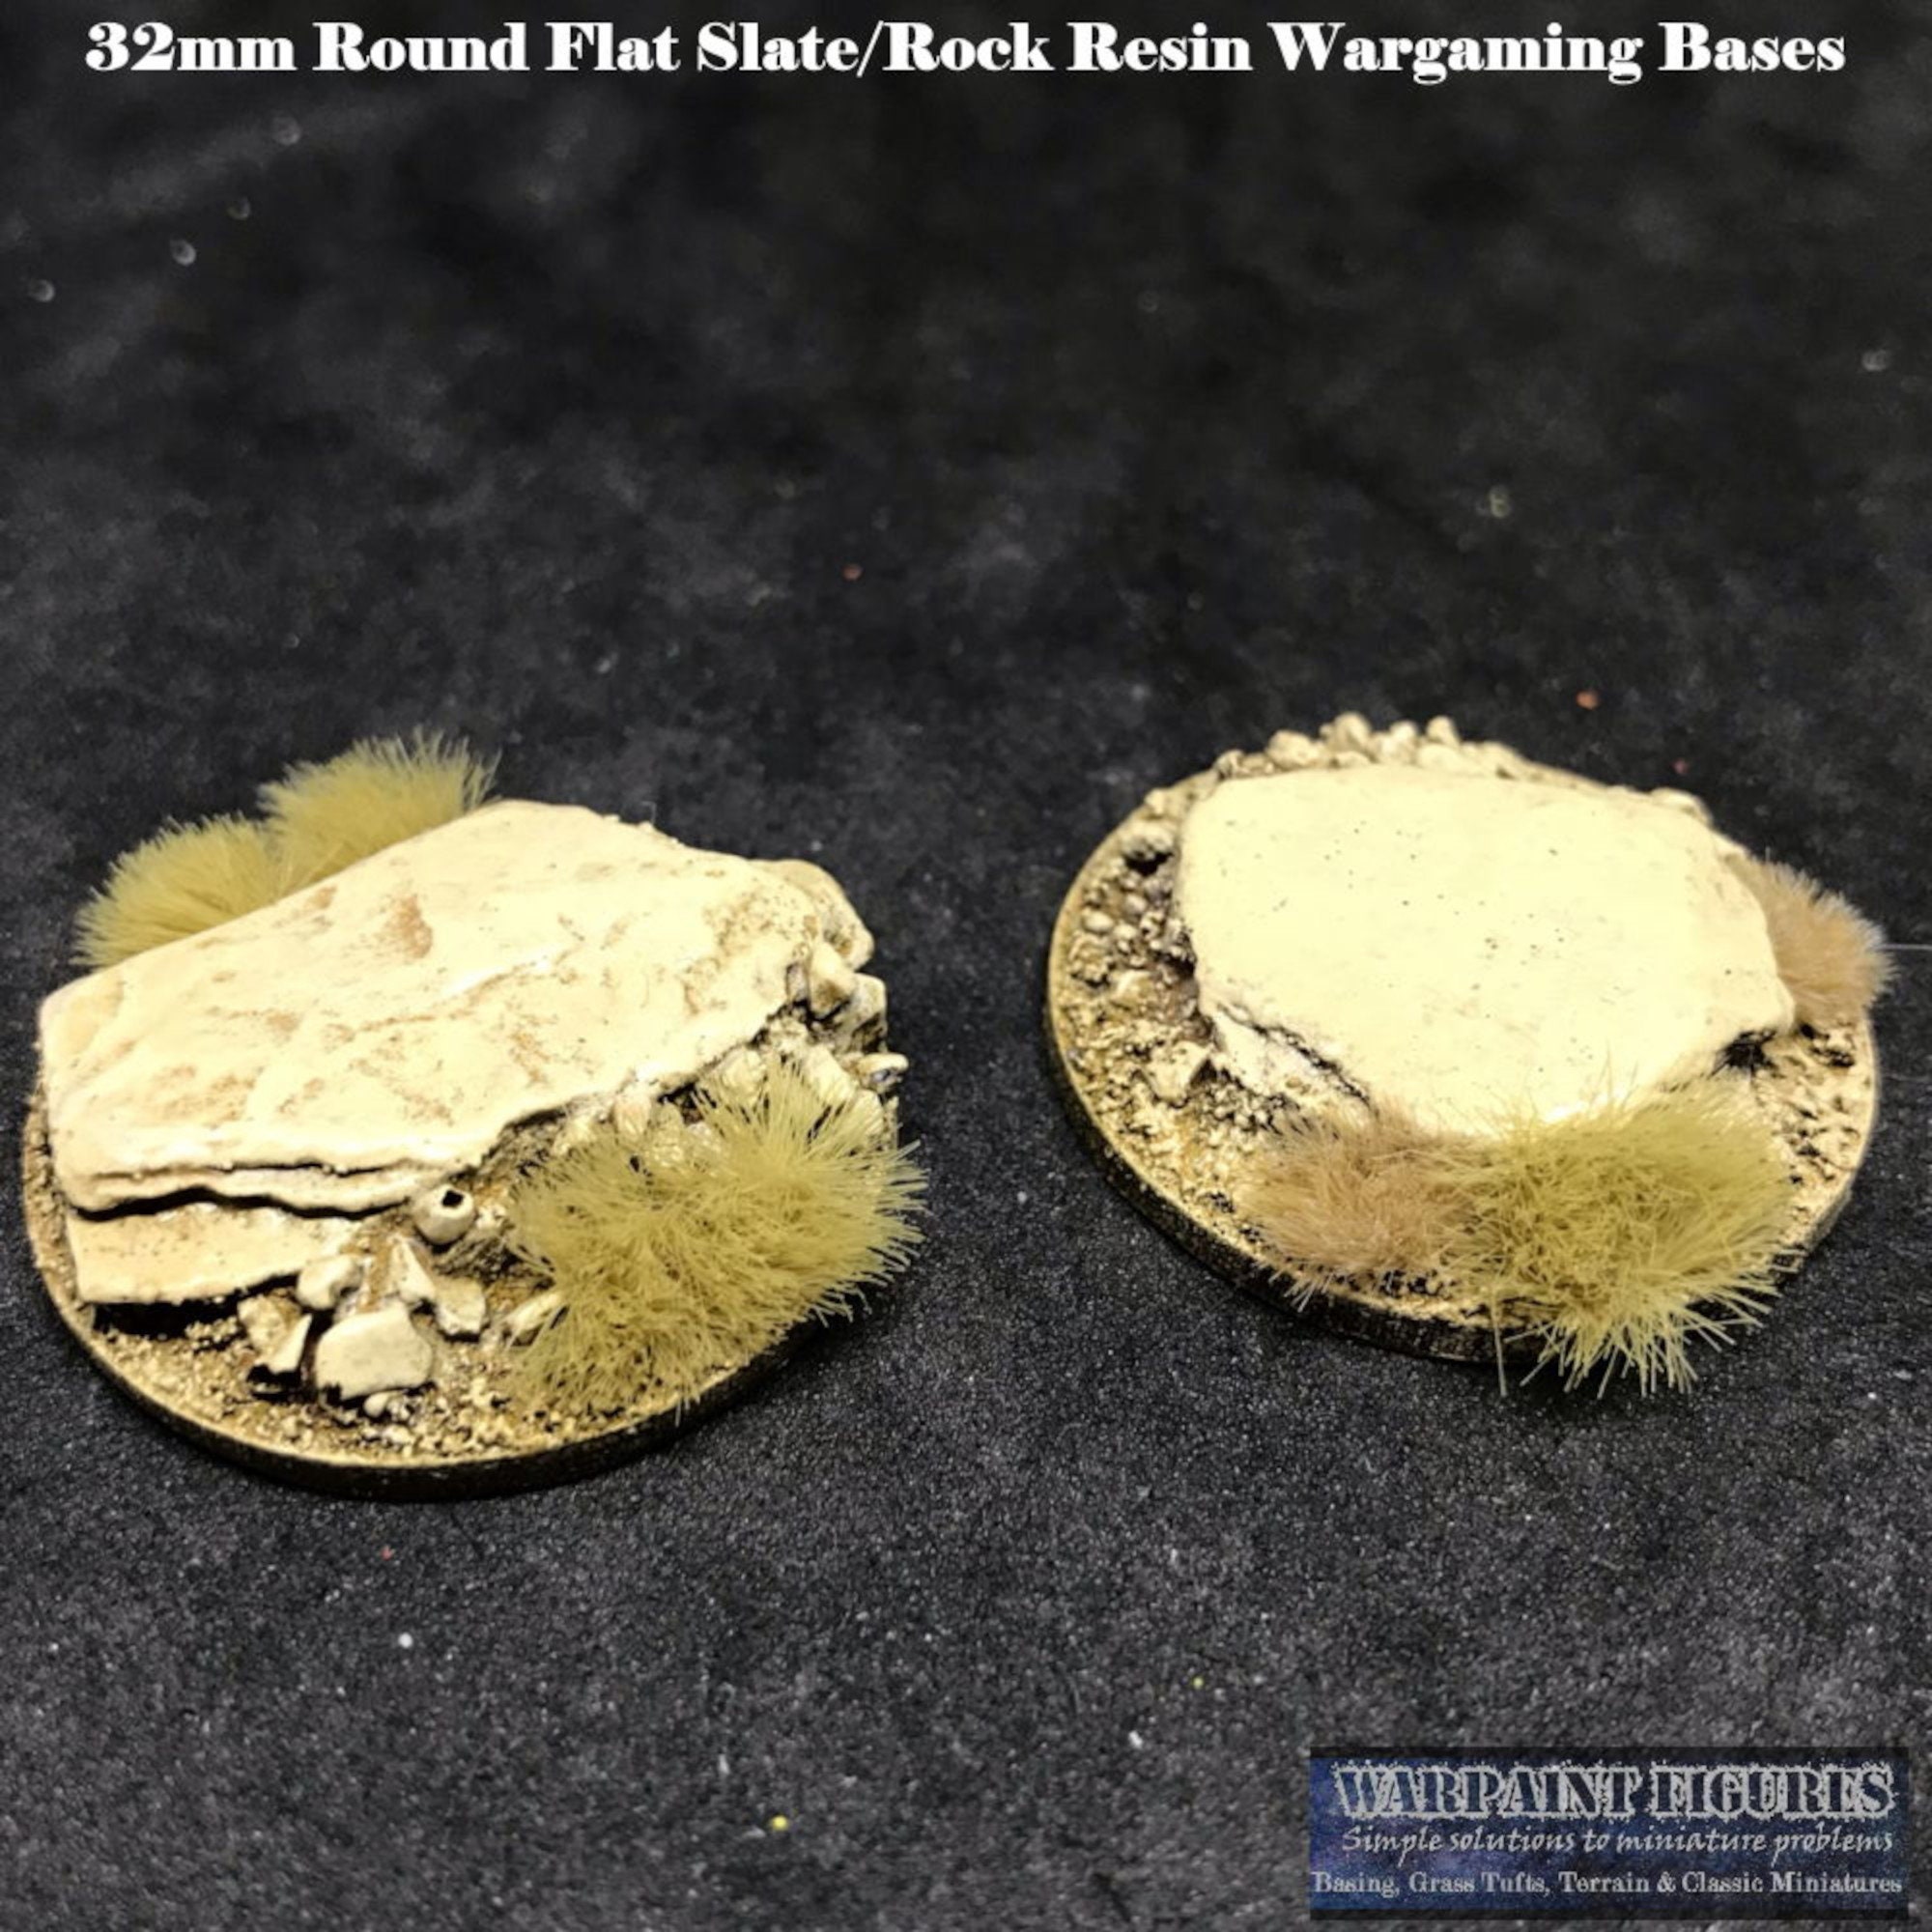 roleplaying 10 x 32mm rock/slate resin bases for warhammer minatures 